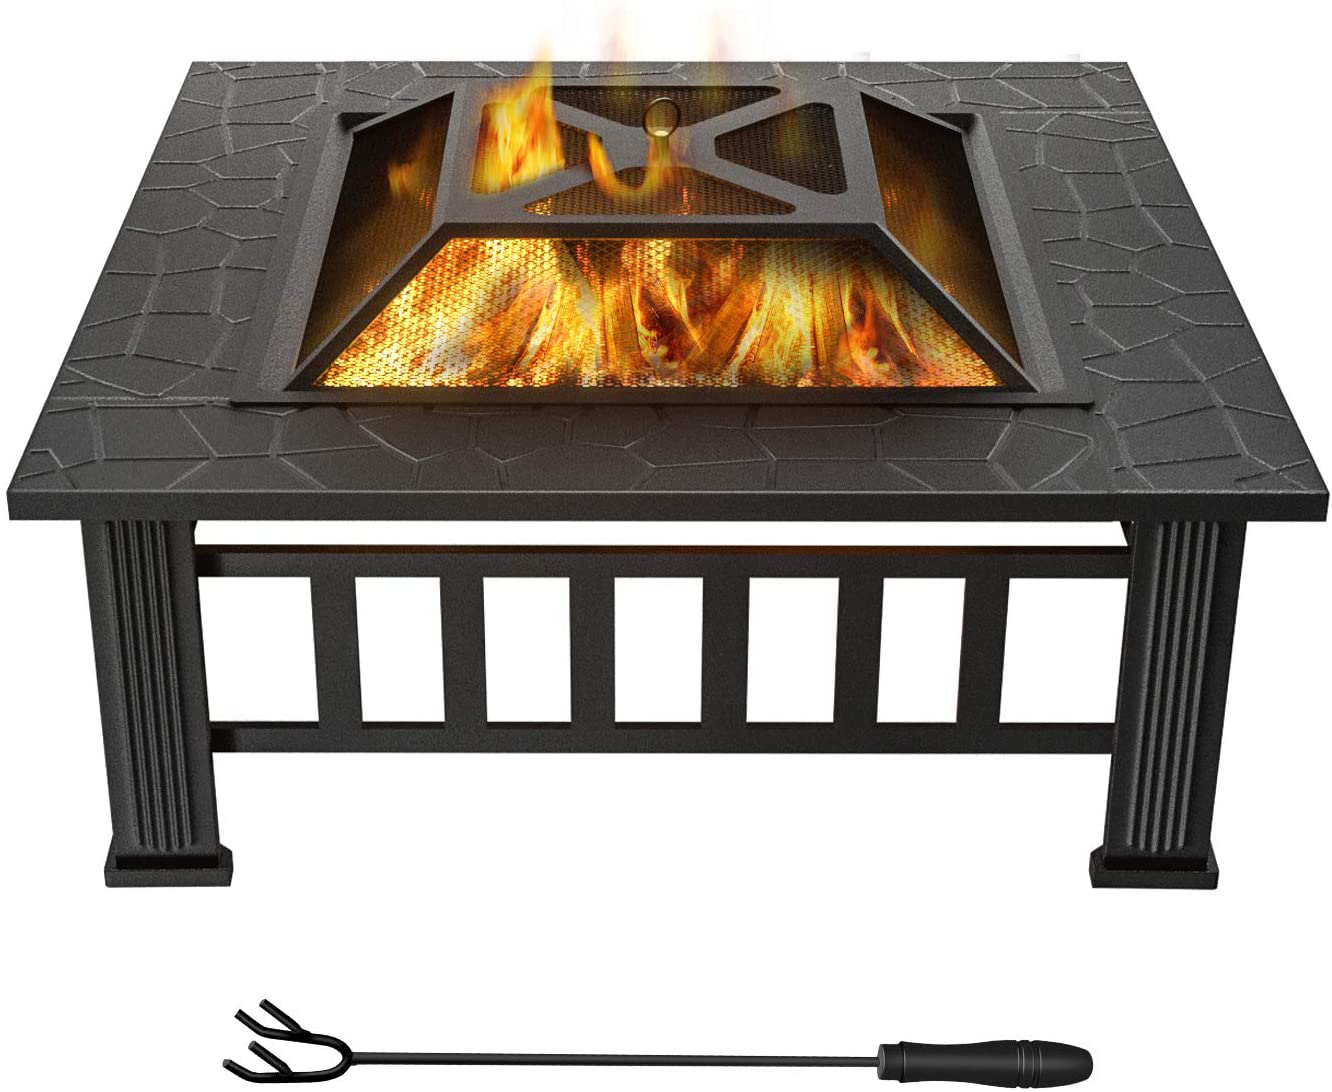 WINWEND Fire Pit Outdoor Wood Burning, 32in Firepit with Spark Screen, Waterproof Cover, Poker, Square Firepit for Patio Backyard Garden